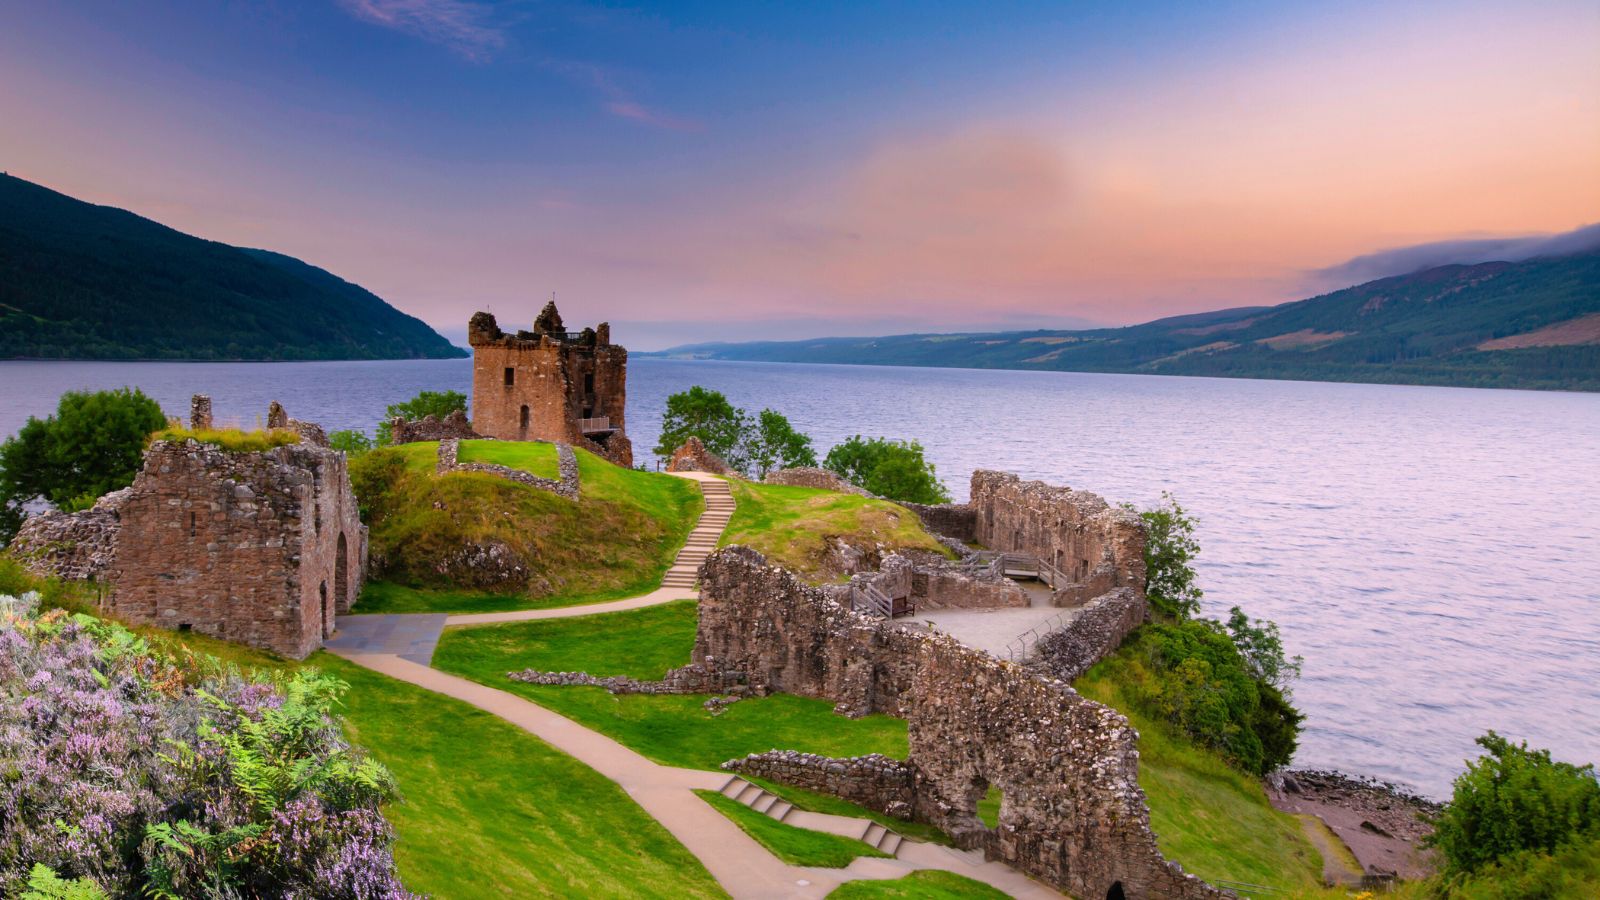 <p>You can’t list the best things to do in Scotland without mentioning Loch Ness. It’s a highlight of the Highlands, known everywhere for the elusive monster, <em>Nessie</em>, said to inhabit it.</p><p>Yet the loch doesn’t need a mythical creature to be noteworthy. It’s around 37km long, making it the largest freshwater loch in the highlands. It’s stunning, surrounded by mountains and forests, and has the mighty Urquhart Castle on its shore for even more iconic photo opportunities.</p>